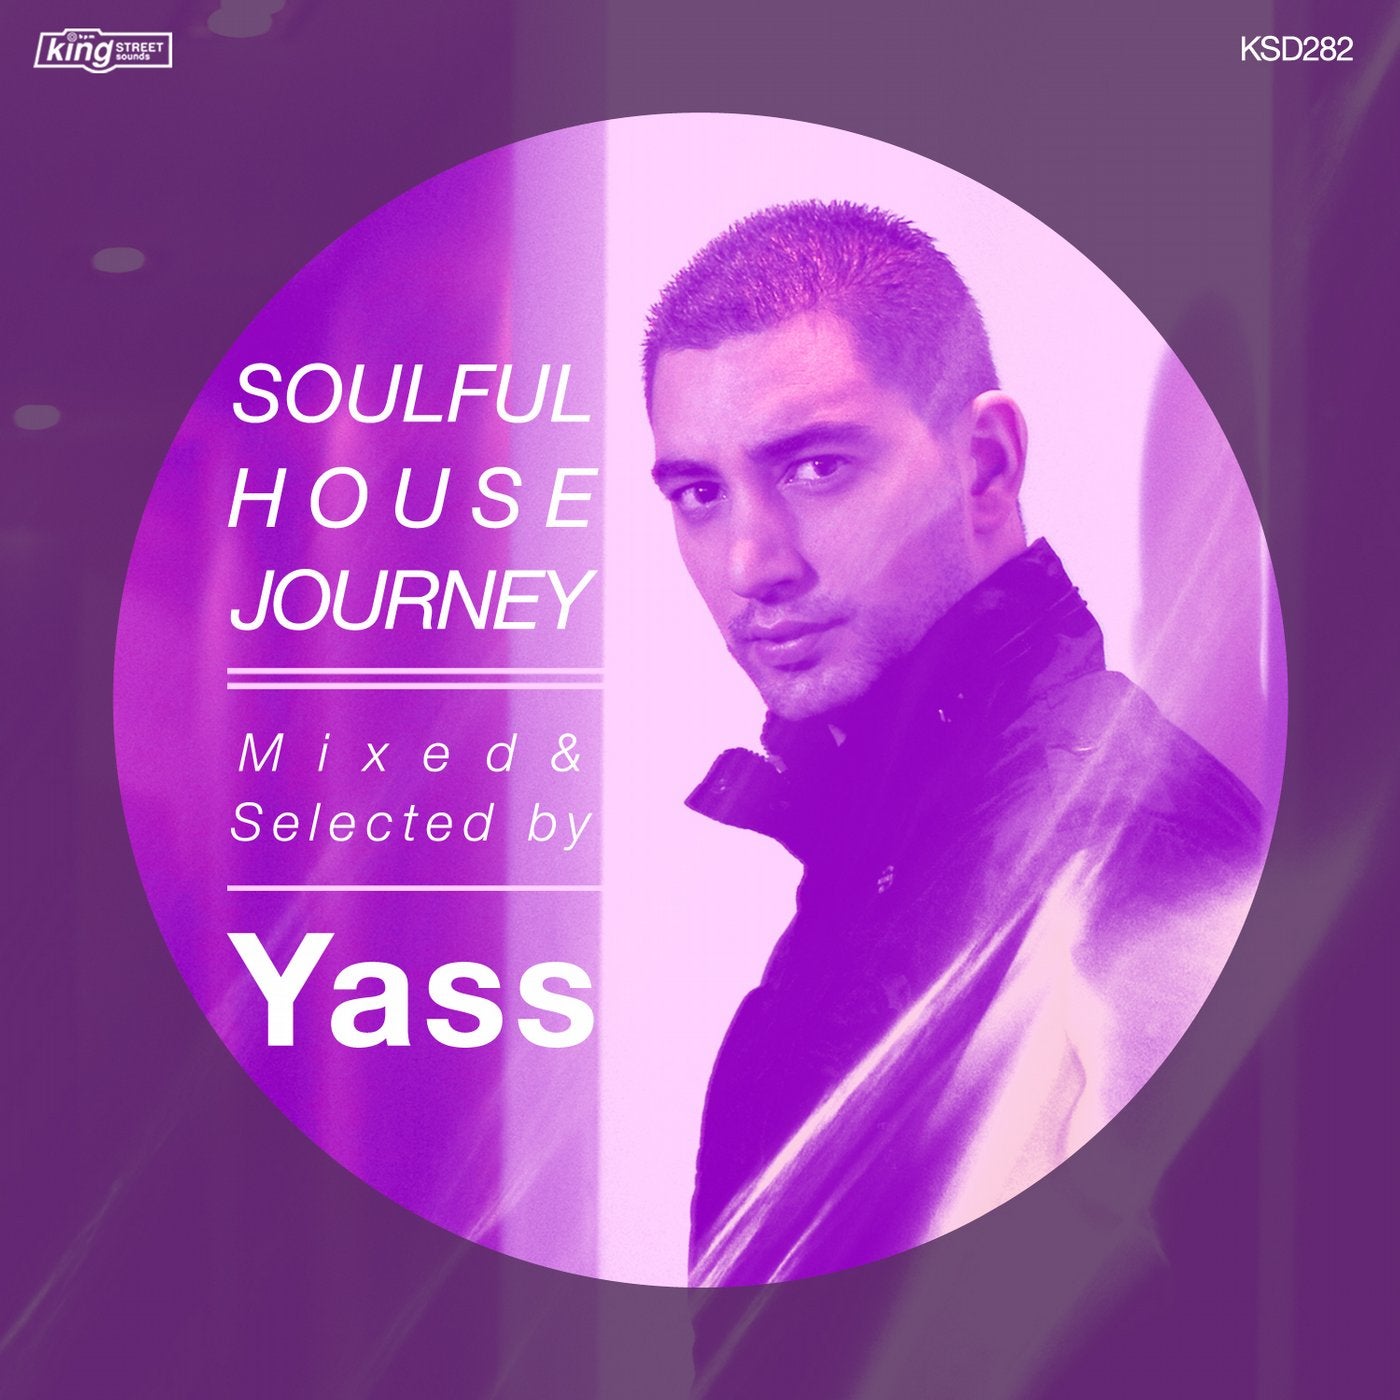 Soulful House Journey: Mixed & Selected By Yass